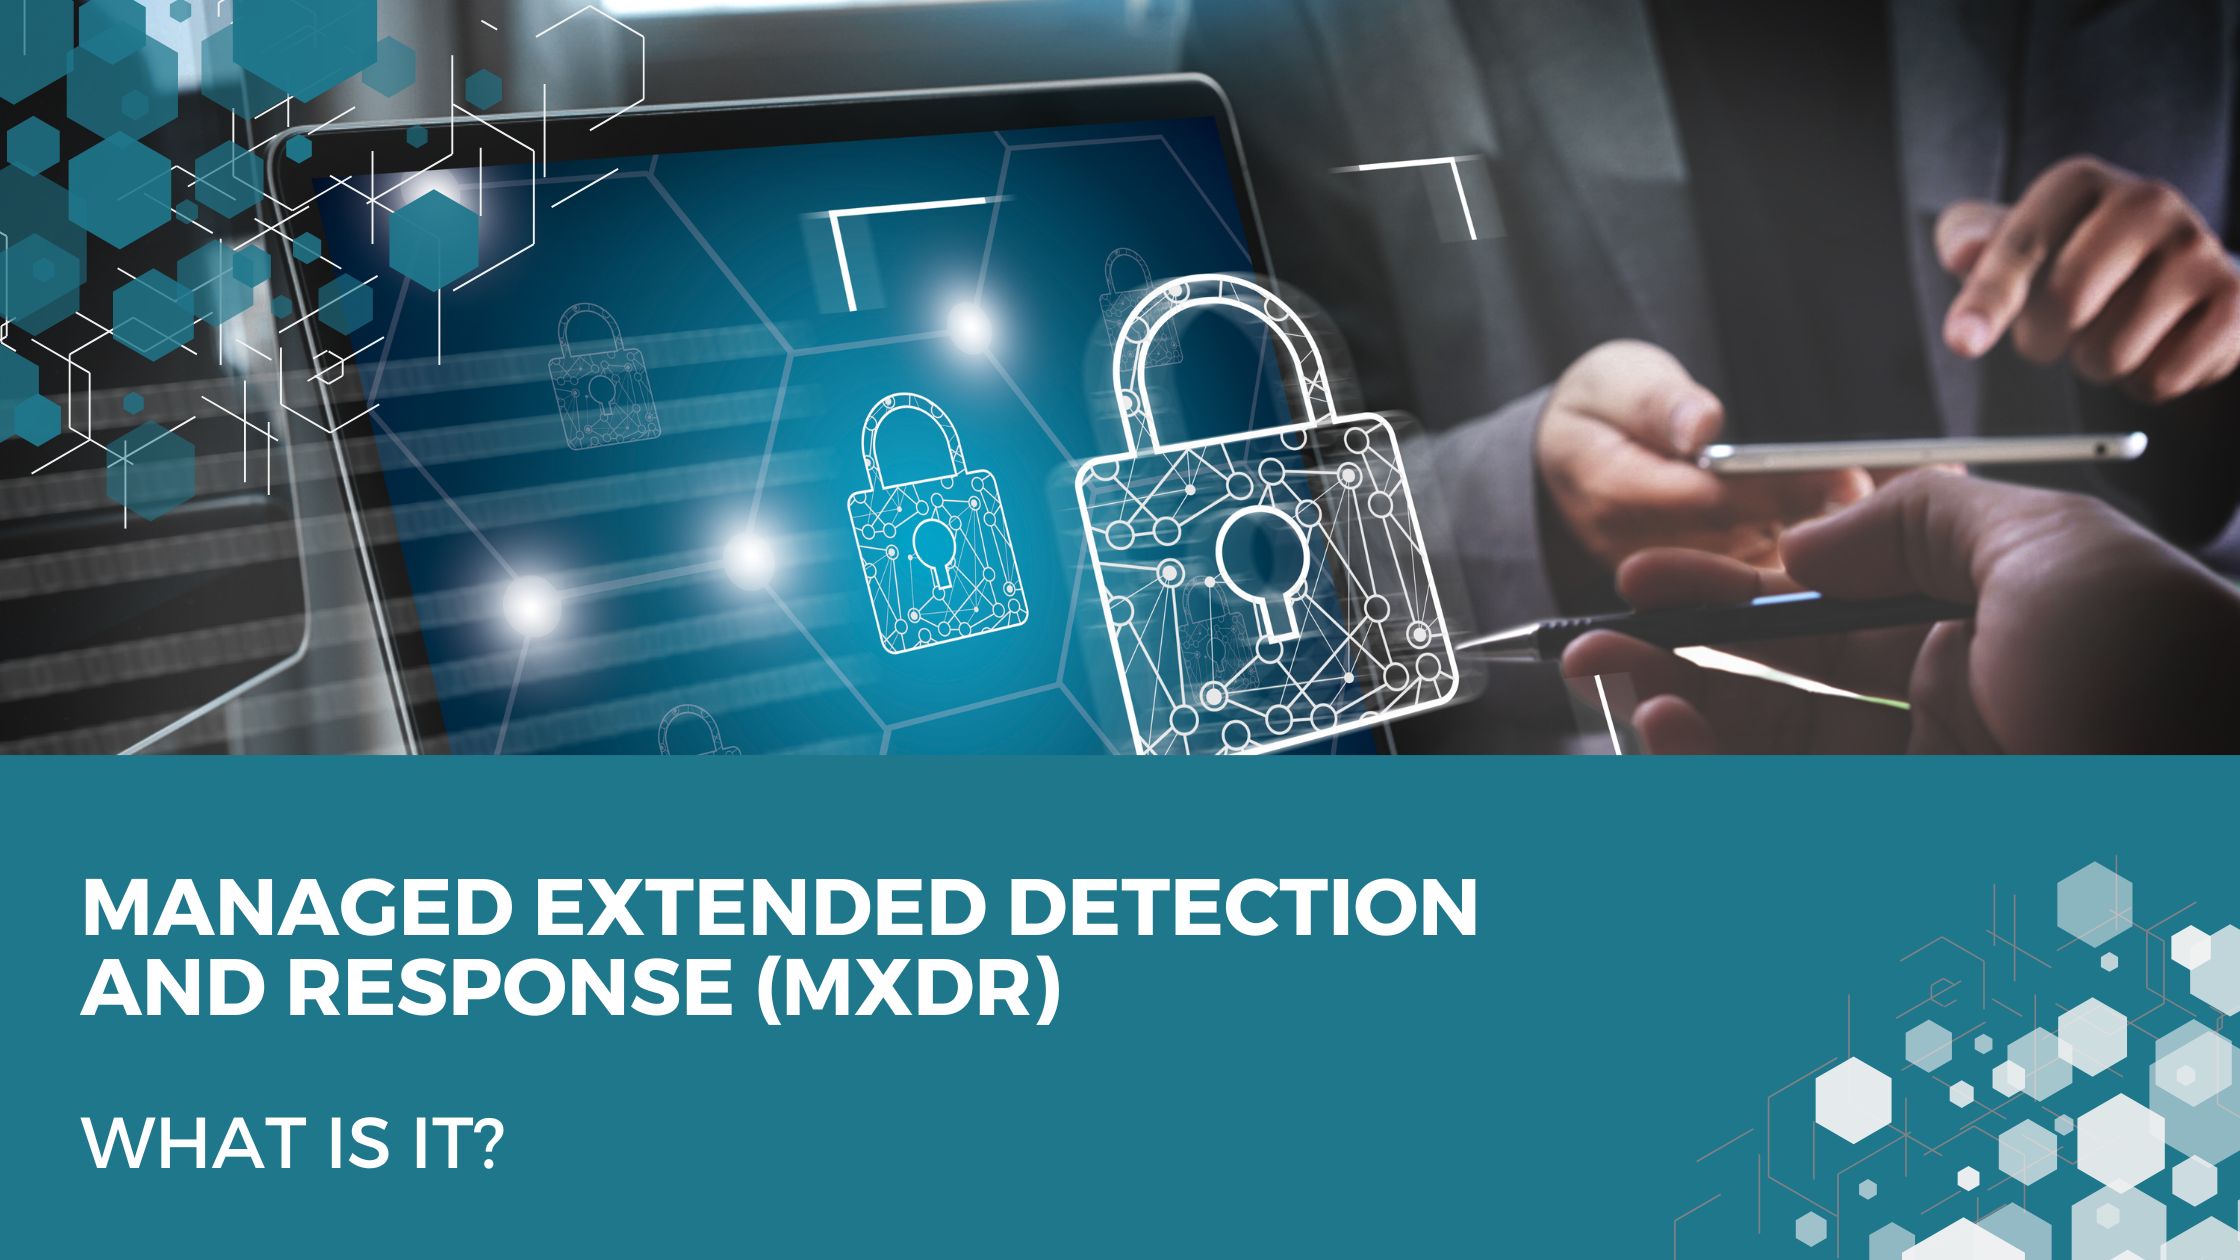 Managed Extended Detection and Response (MXDR). What is it?